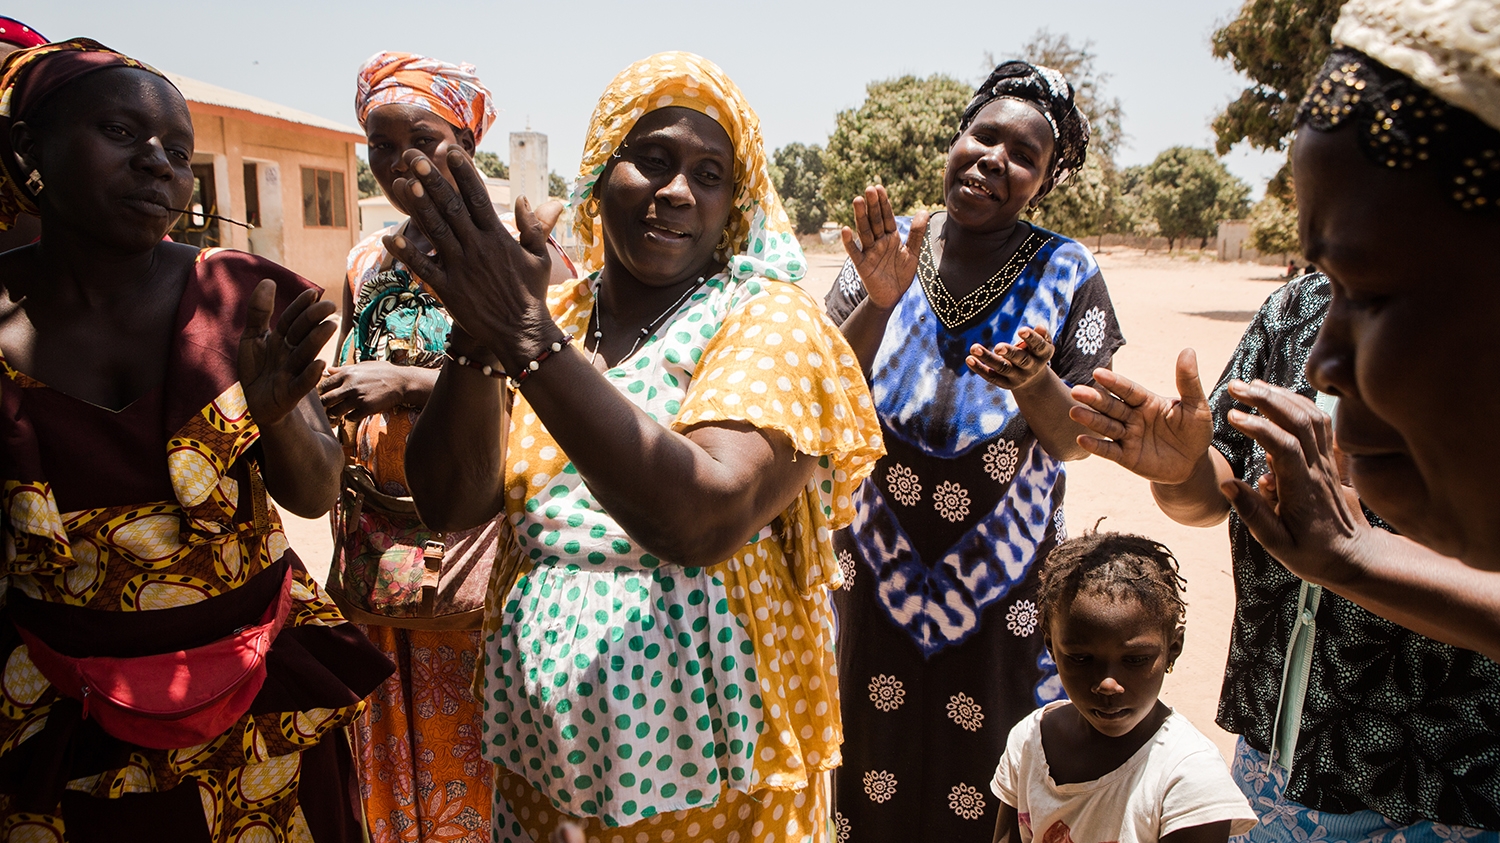 A group of women and children sing and dance during a trachoma awareness session in The Gambia.